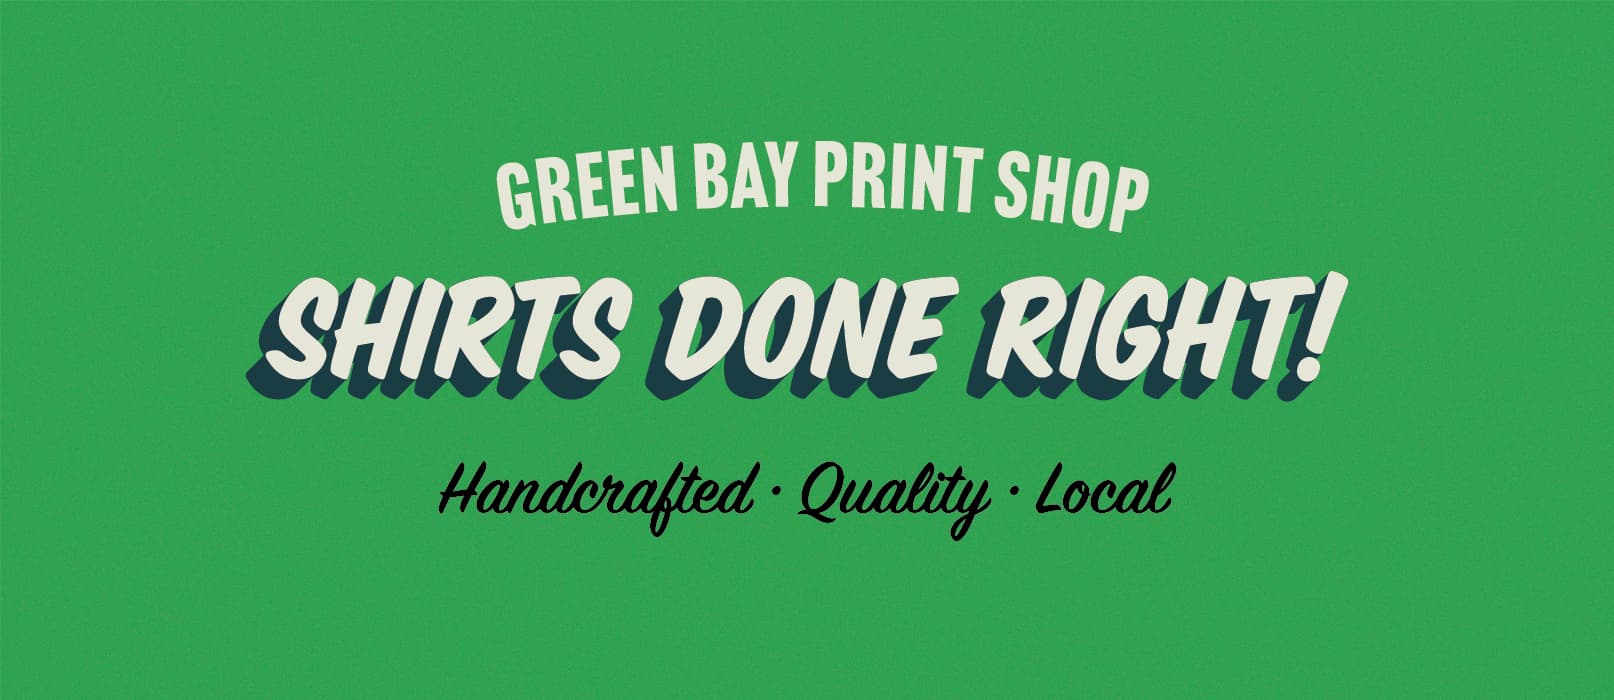 Green Bay Print Shop. Shirts done right! Handcrafted. Quality.Local.